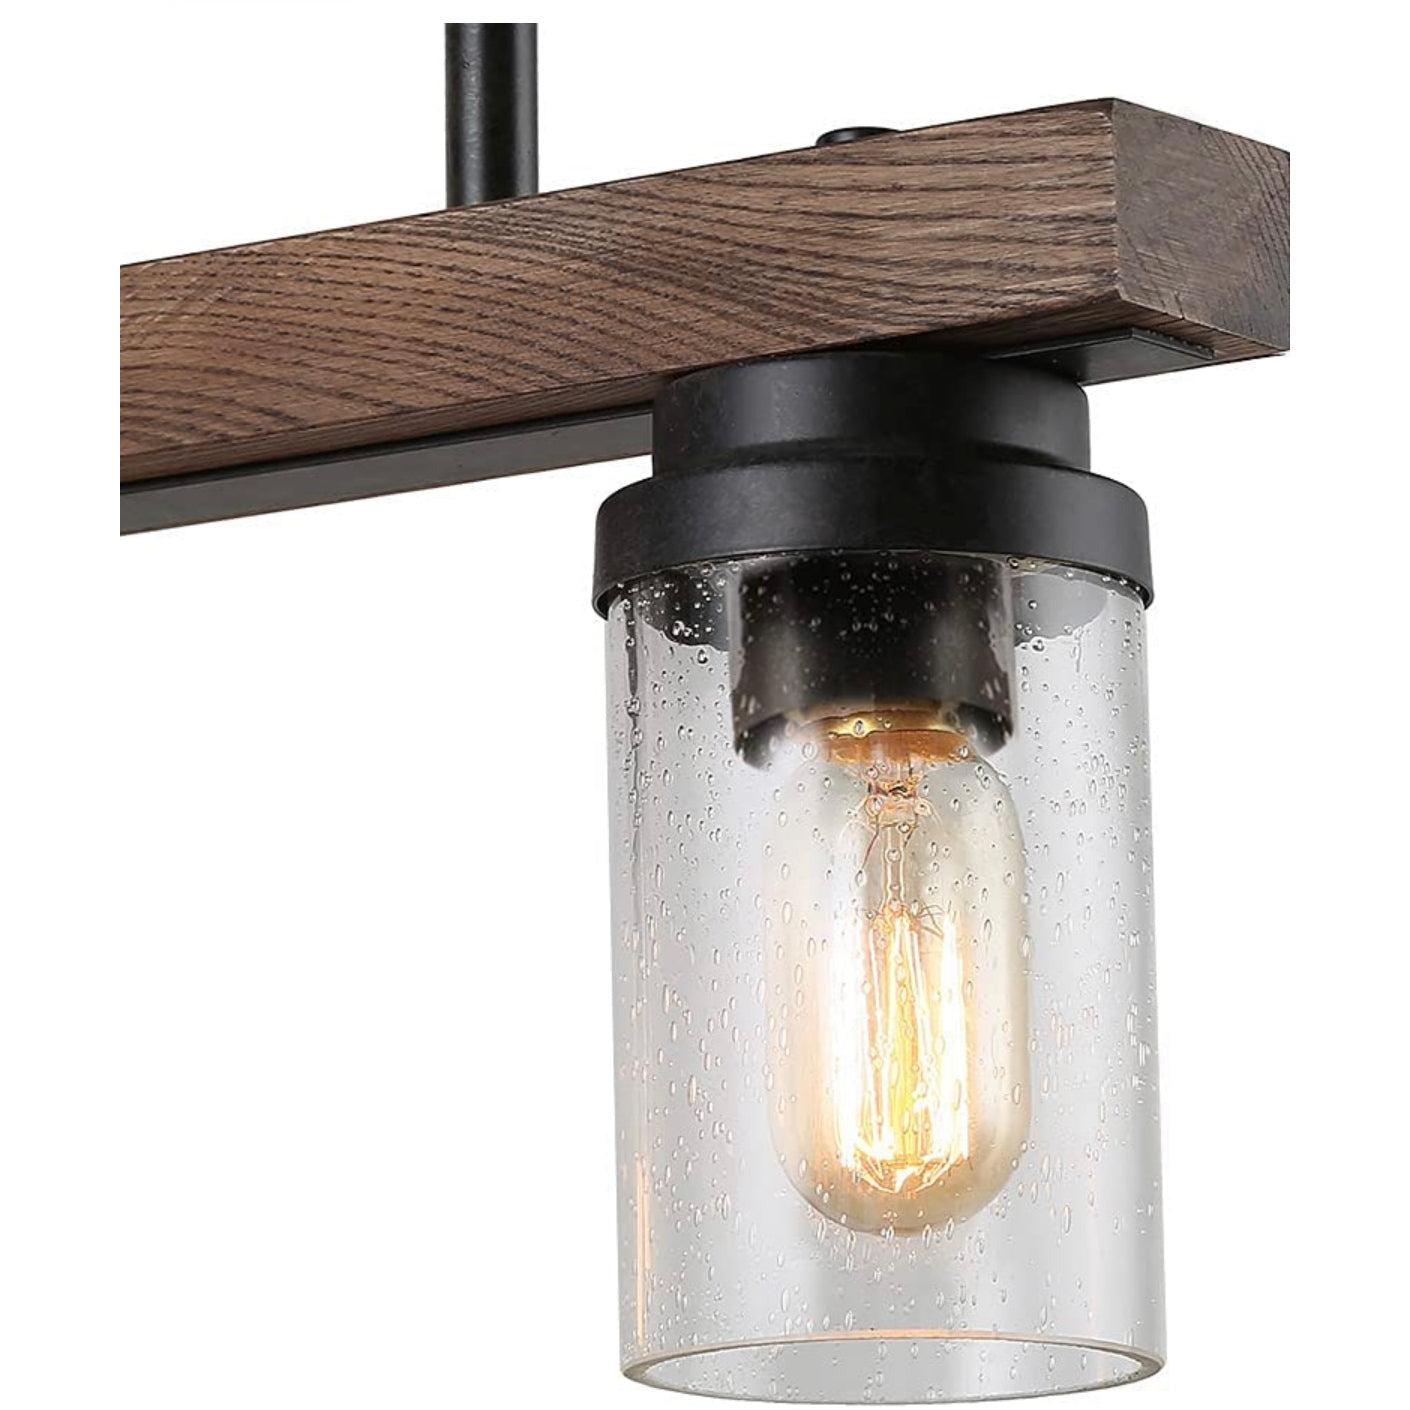 Anmytek Kitchen Island Pendant Lighting with Bubble Glass Shade Industrial Rustic Chandelier Retro Ceiling Light or Edison Vintage Hanging Light Fixture 5-Lights (C0039)